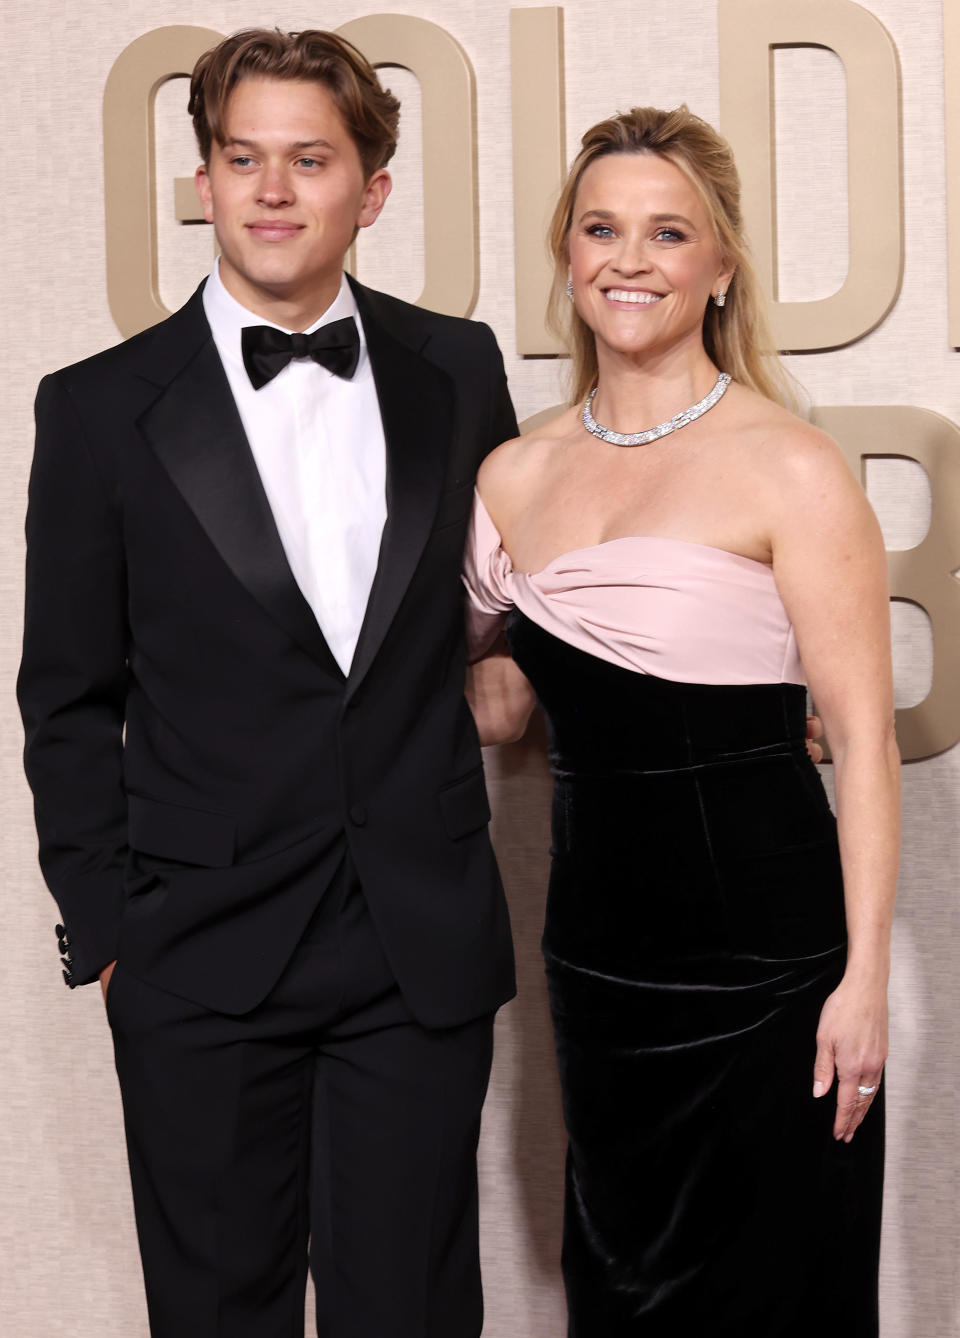 Deacon Phillippe and Reese Witherspoon attend the 81st Annual Golden Globe Awards. / Credit: Amy Sussman/Getty Images